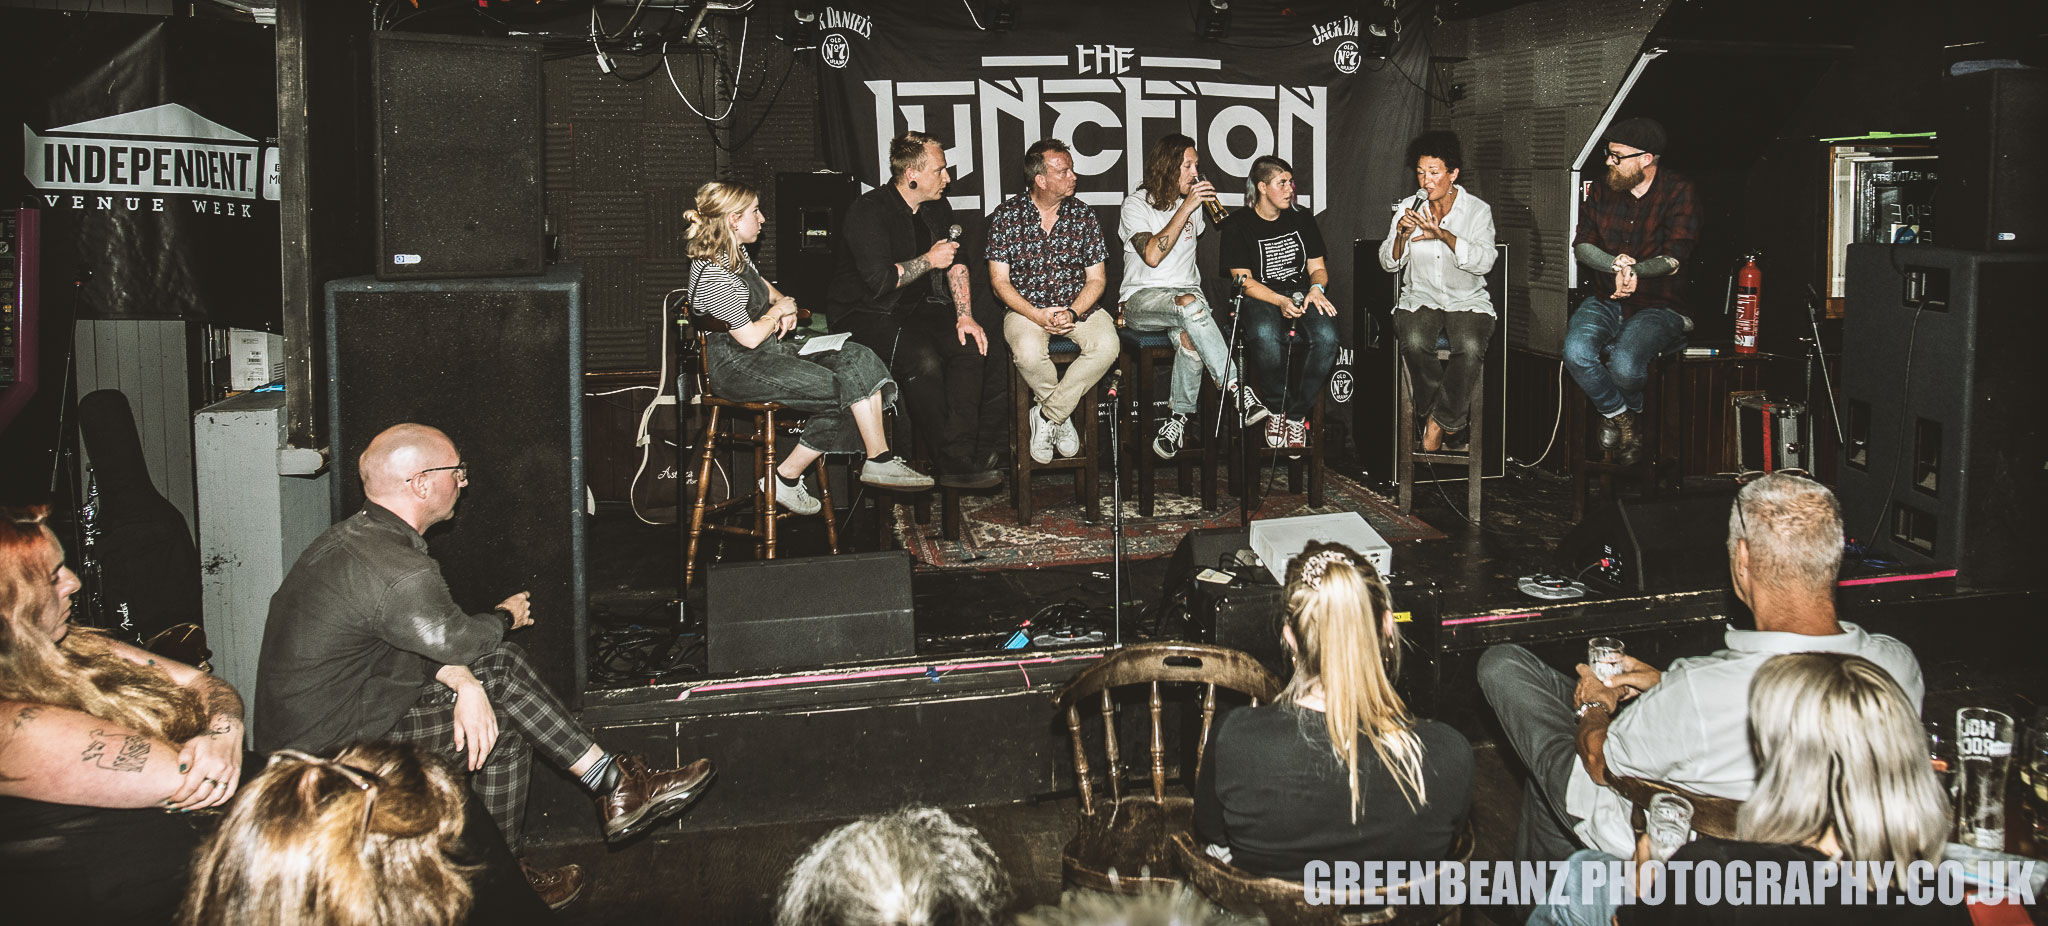 MVT Fightback Plymouth Panel discussion about the importance of grass roots venues at The Junction 18/09/19